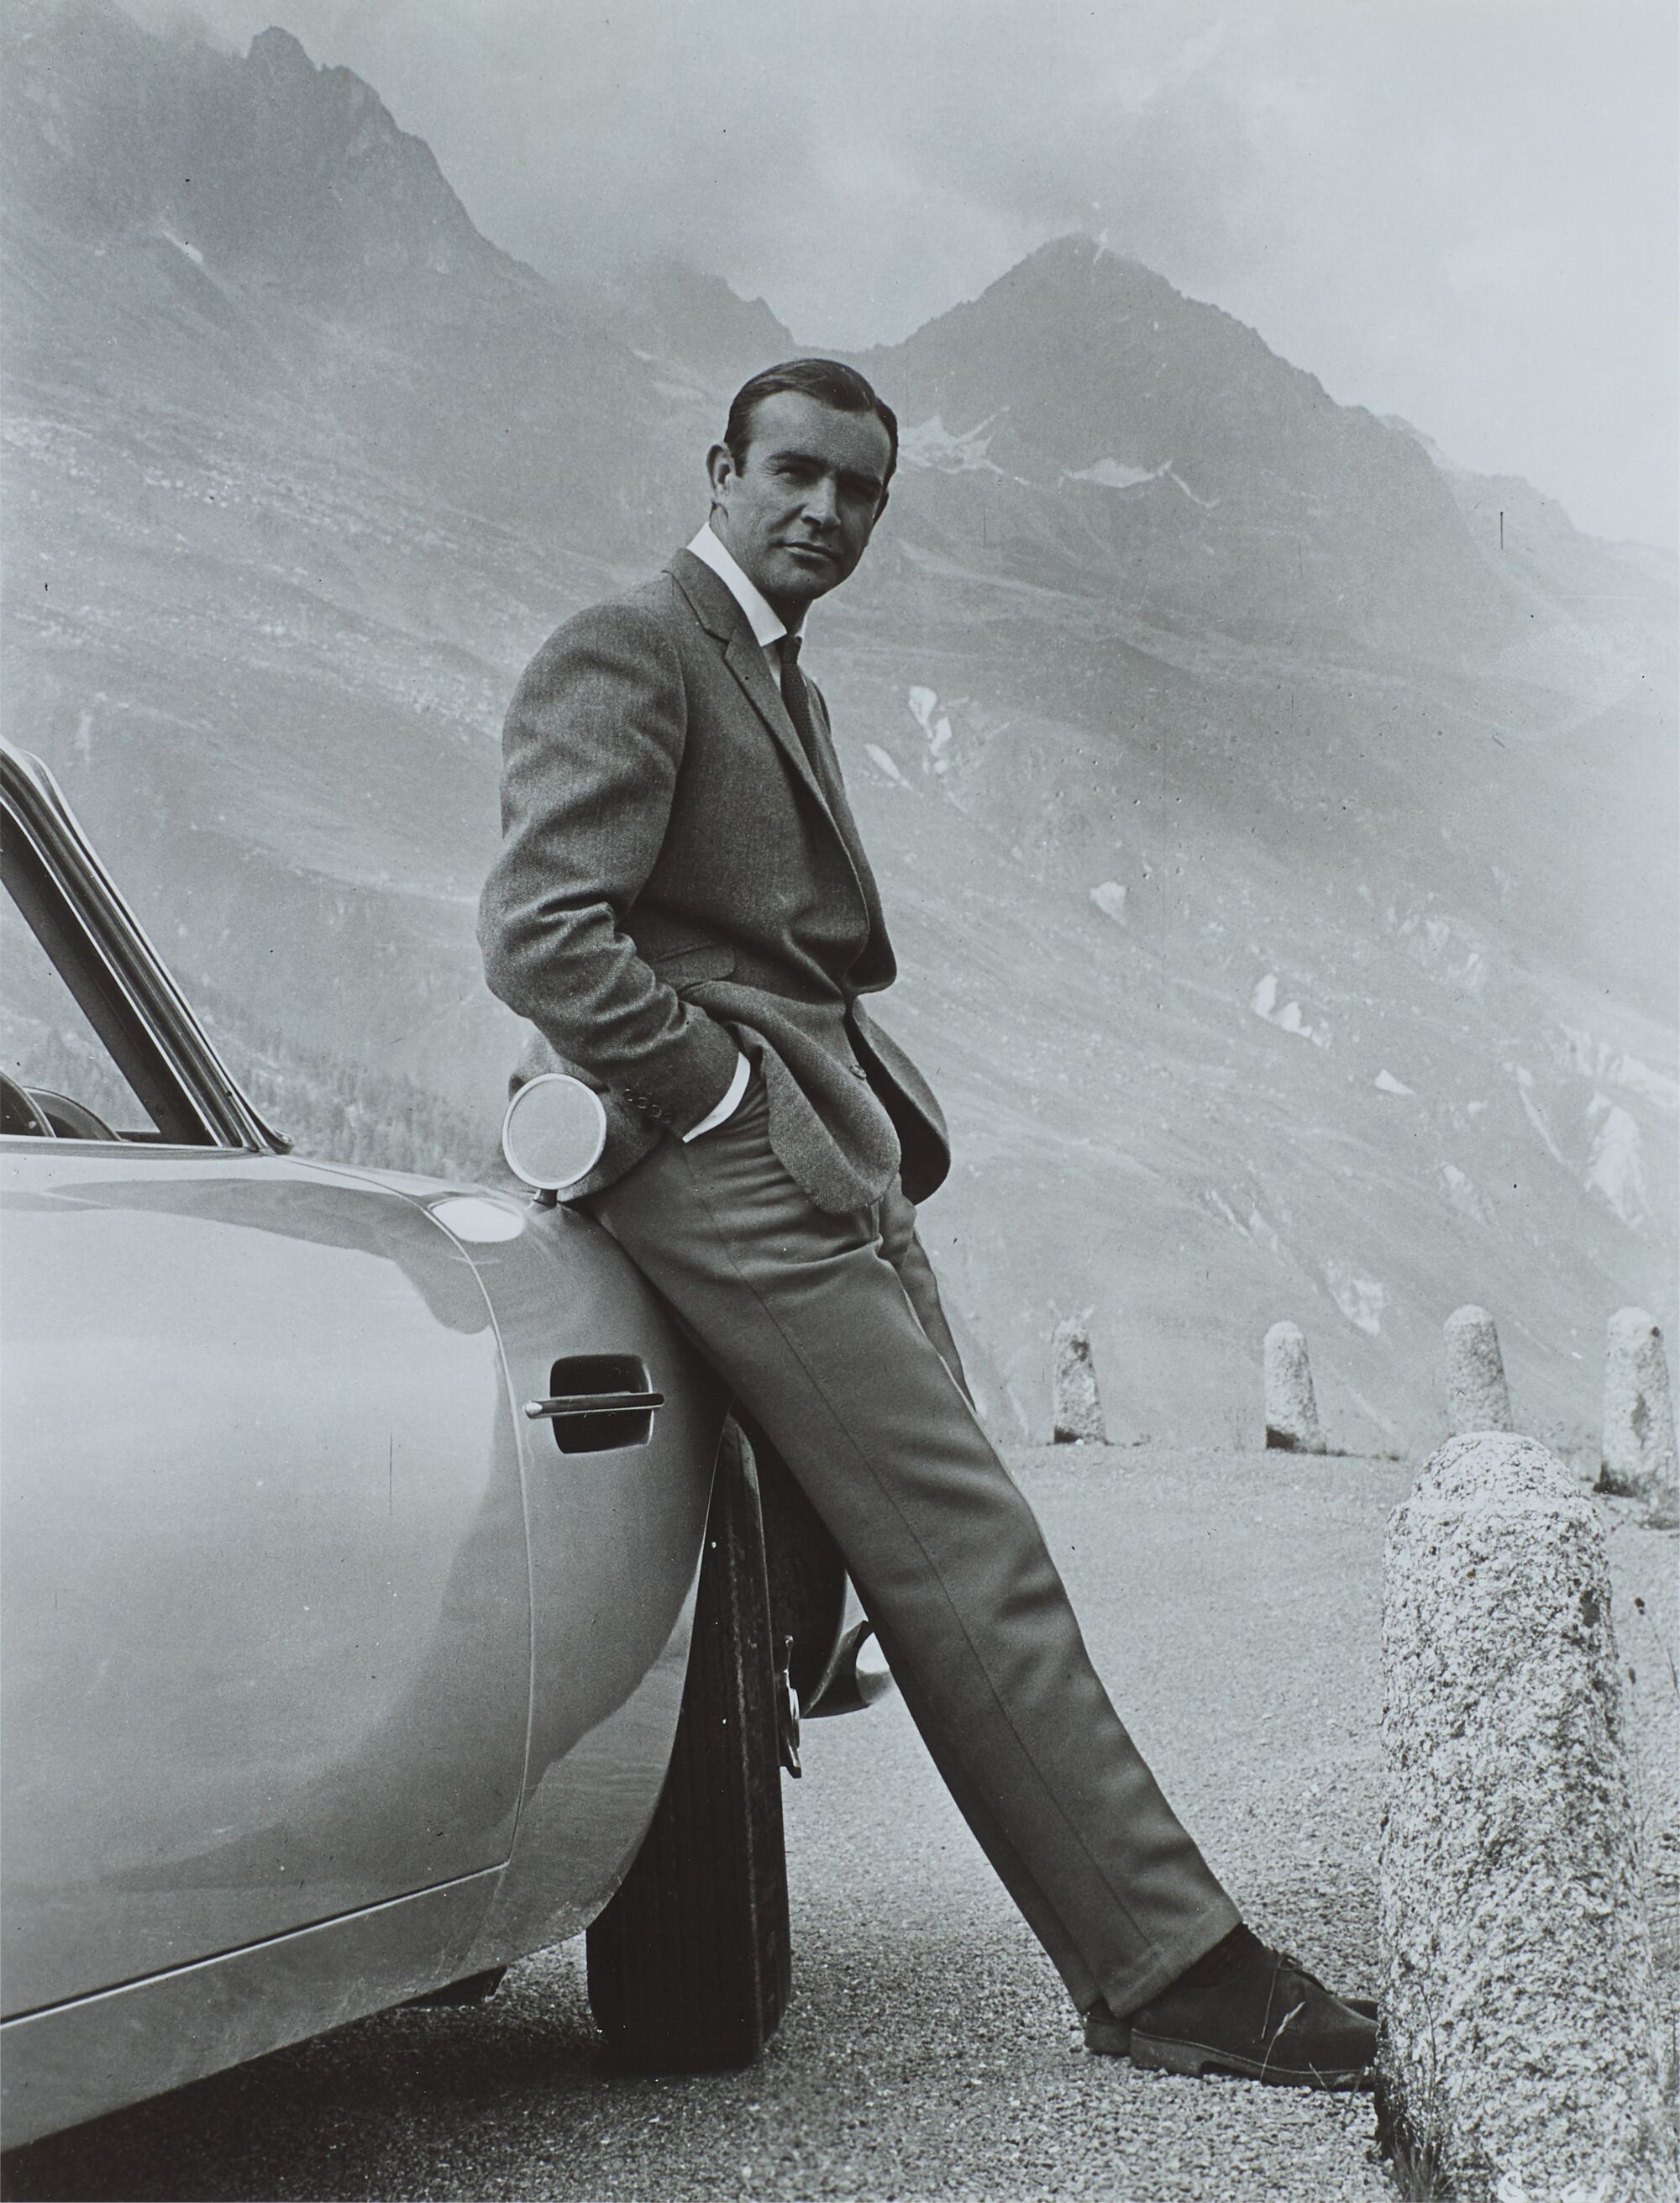 The Wick - Sean Connery with Aston Martin DB5 during the filming of Goldfinger, Furka Pass (estimate £300 - £500)